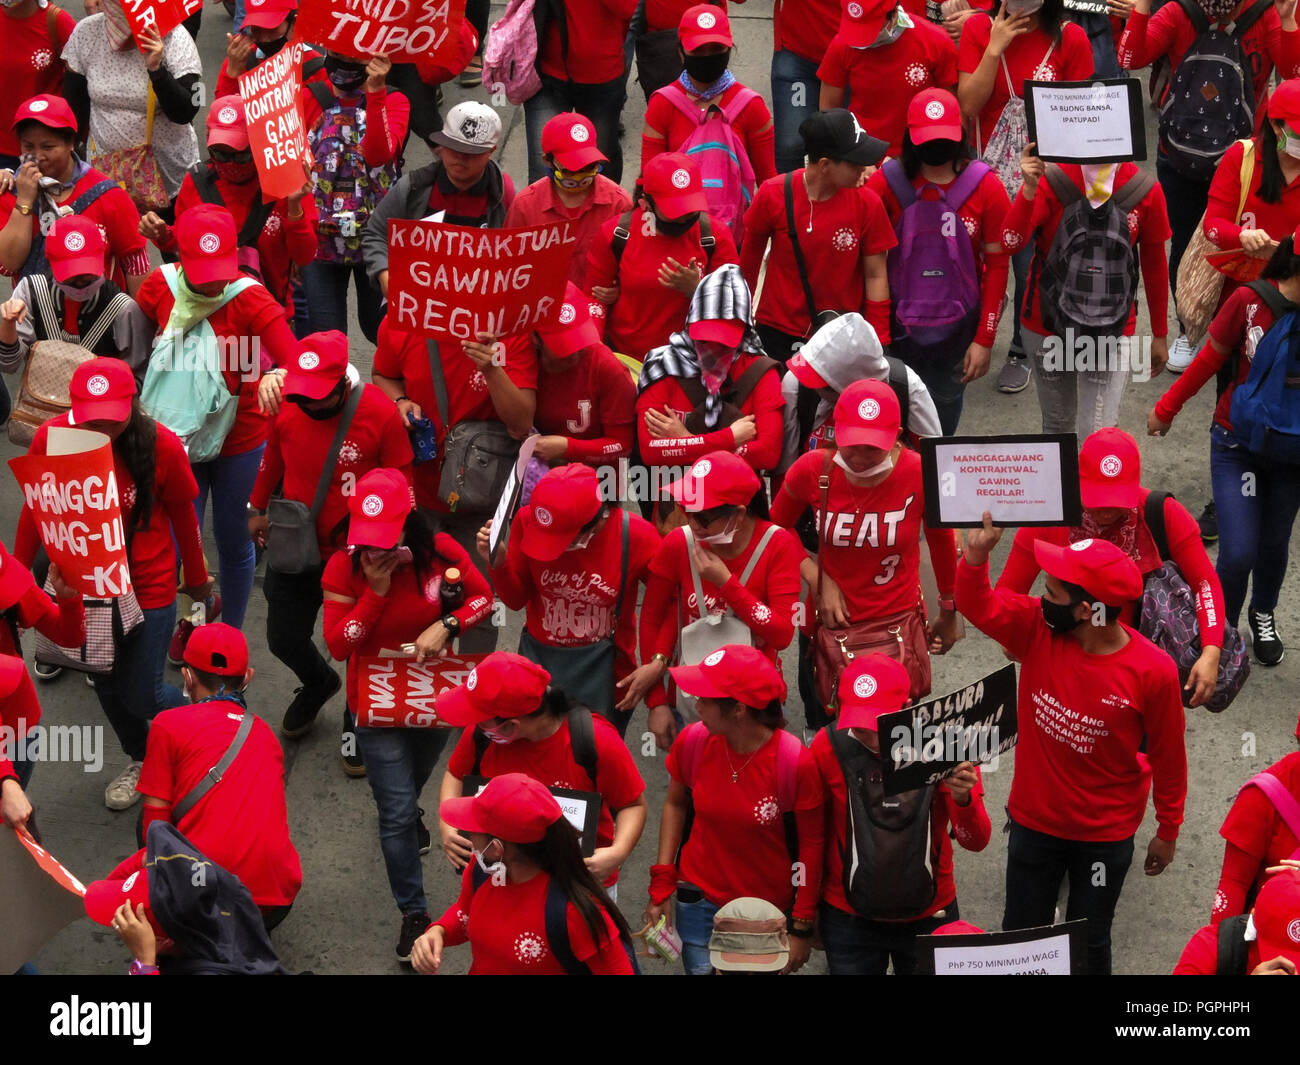 Manila, Philippines. 7th Feb, 2013. Protesters wearing red shirts marching along EspaÃ±a Boulevard going to Mendiola.Labor Union from different business sectors leads National Heroes' Day march to Mendiola. Labor coalitions will mark National Heroes' Day on Monday by protesting the Duterte administration's alleged failure to address workers' issues. Credit: Josefiel Rivera/SOPA Images/ZUMA Wire/Alamy Live News Stock Photo